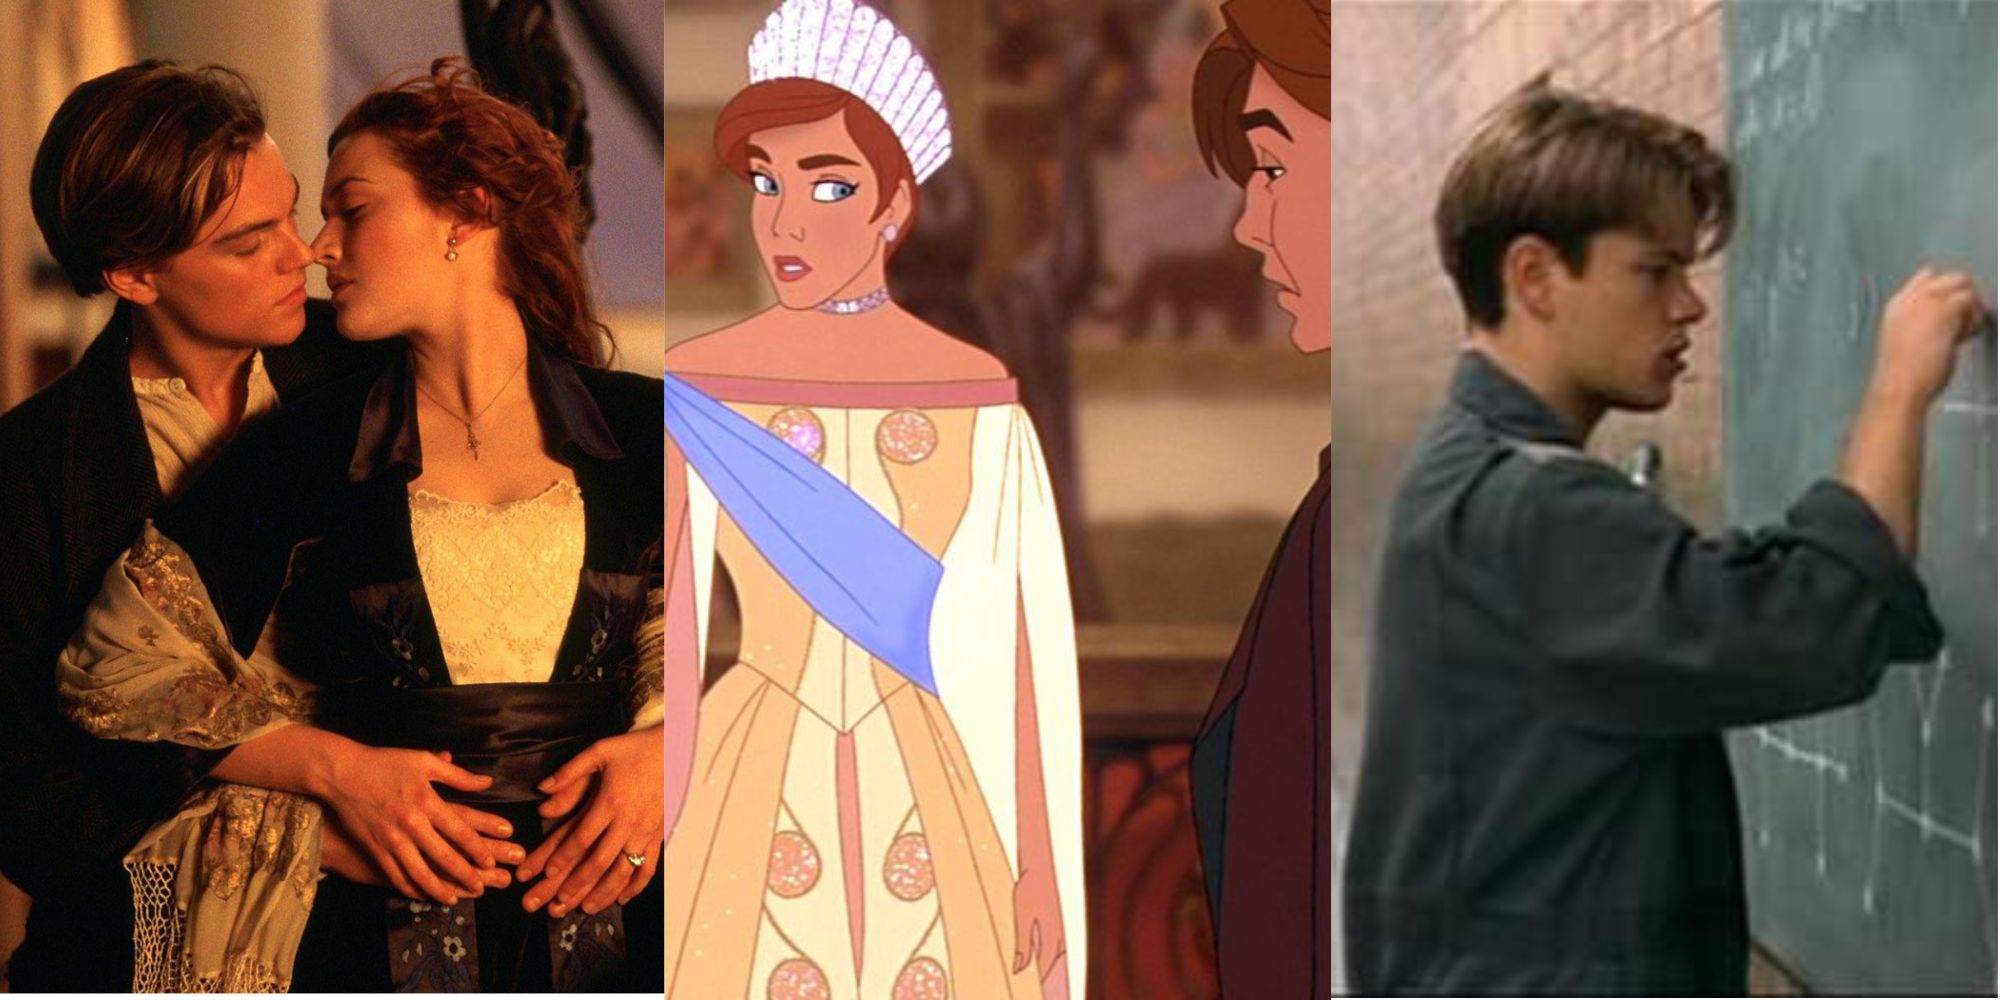 Split image of scenes from Titanic, Anastasia, and Good Will Hunting